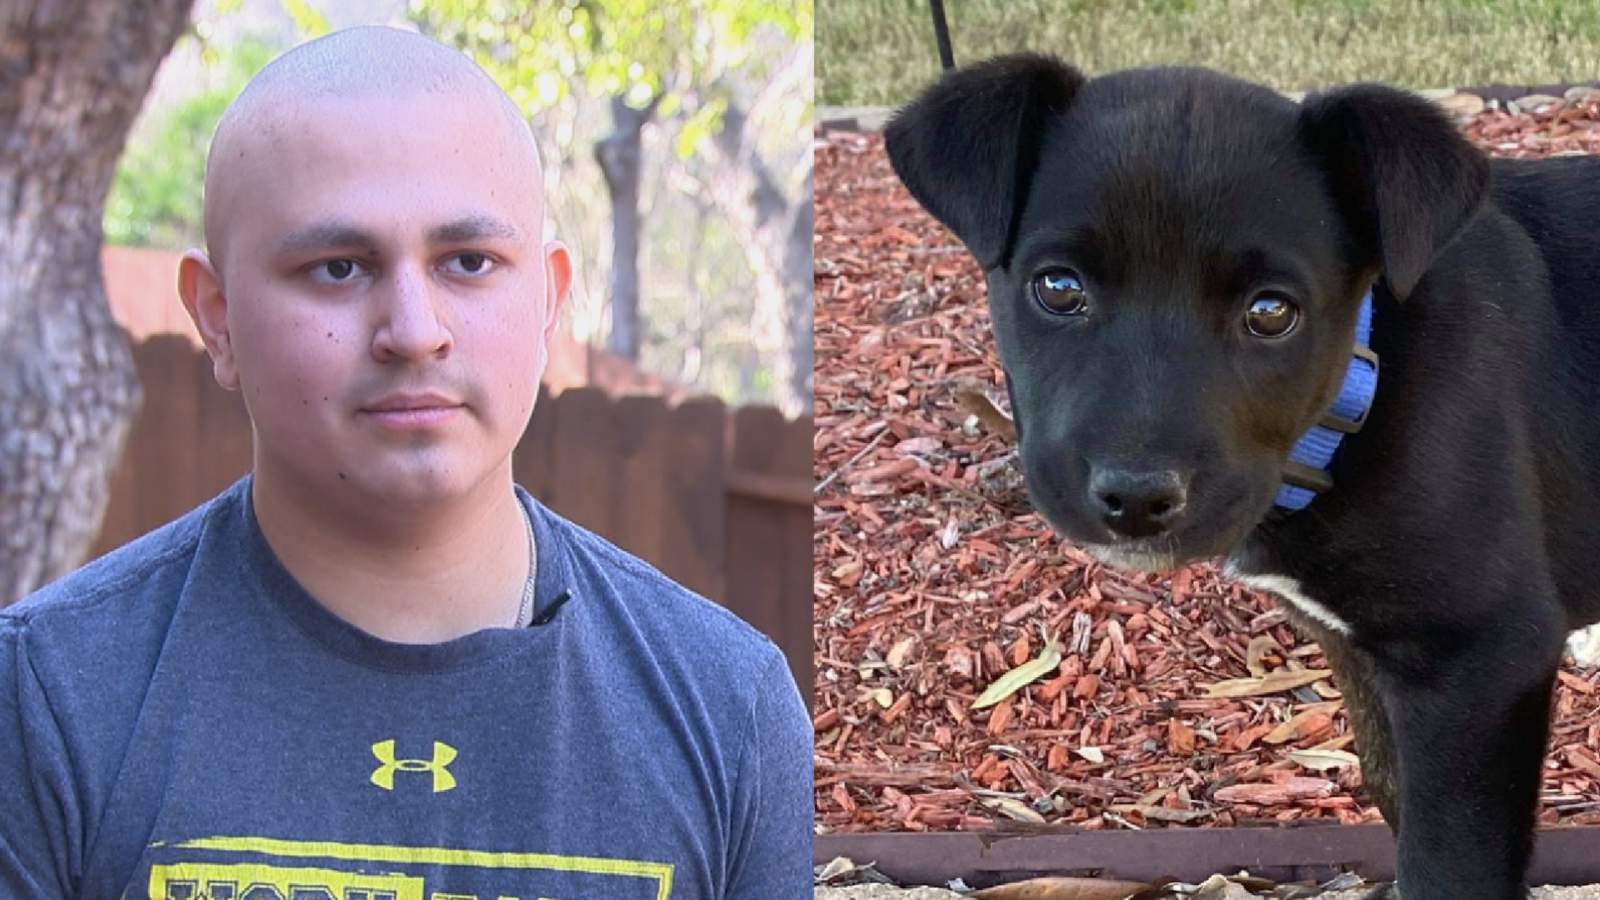 San Antonio teen fighting cancer receives four-legged friend to help with recovery